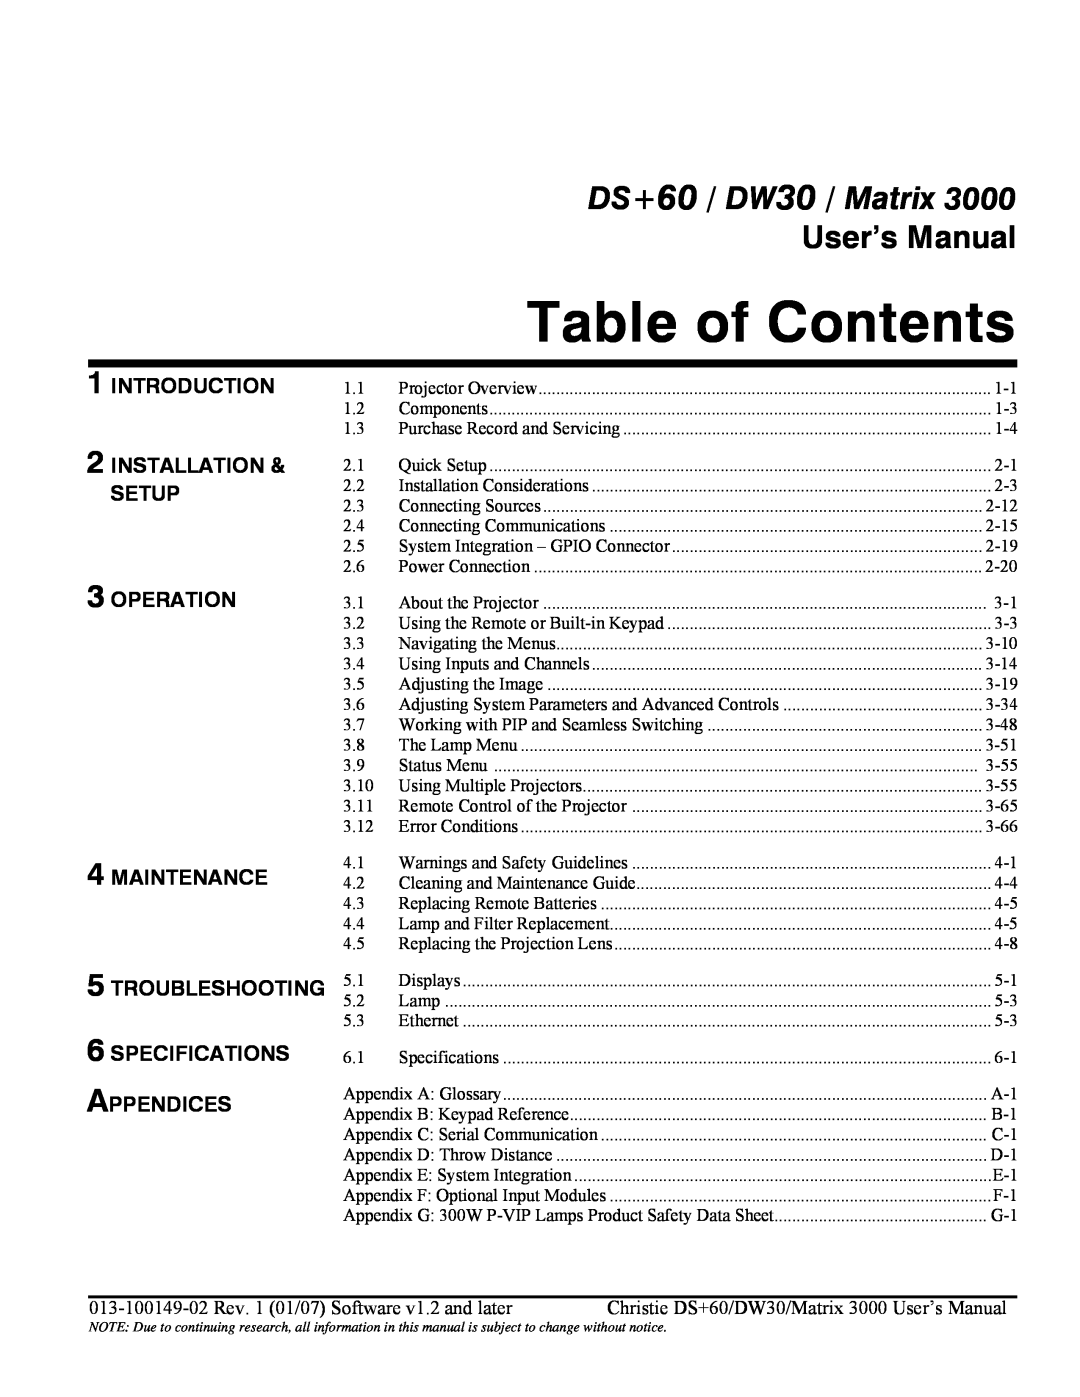 Texas Instruments MATRIX 3000 Table of Contents, Introduction, INSTALLATION & SETUP 3 OPERATION, Maintenance, Appendices 